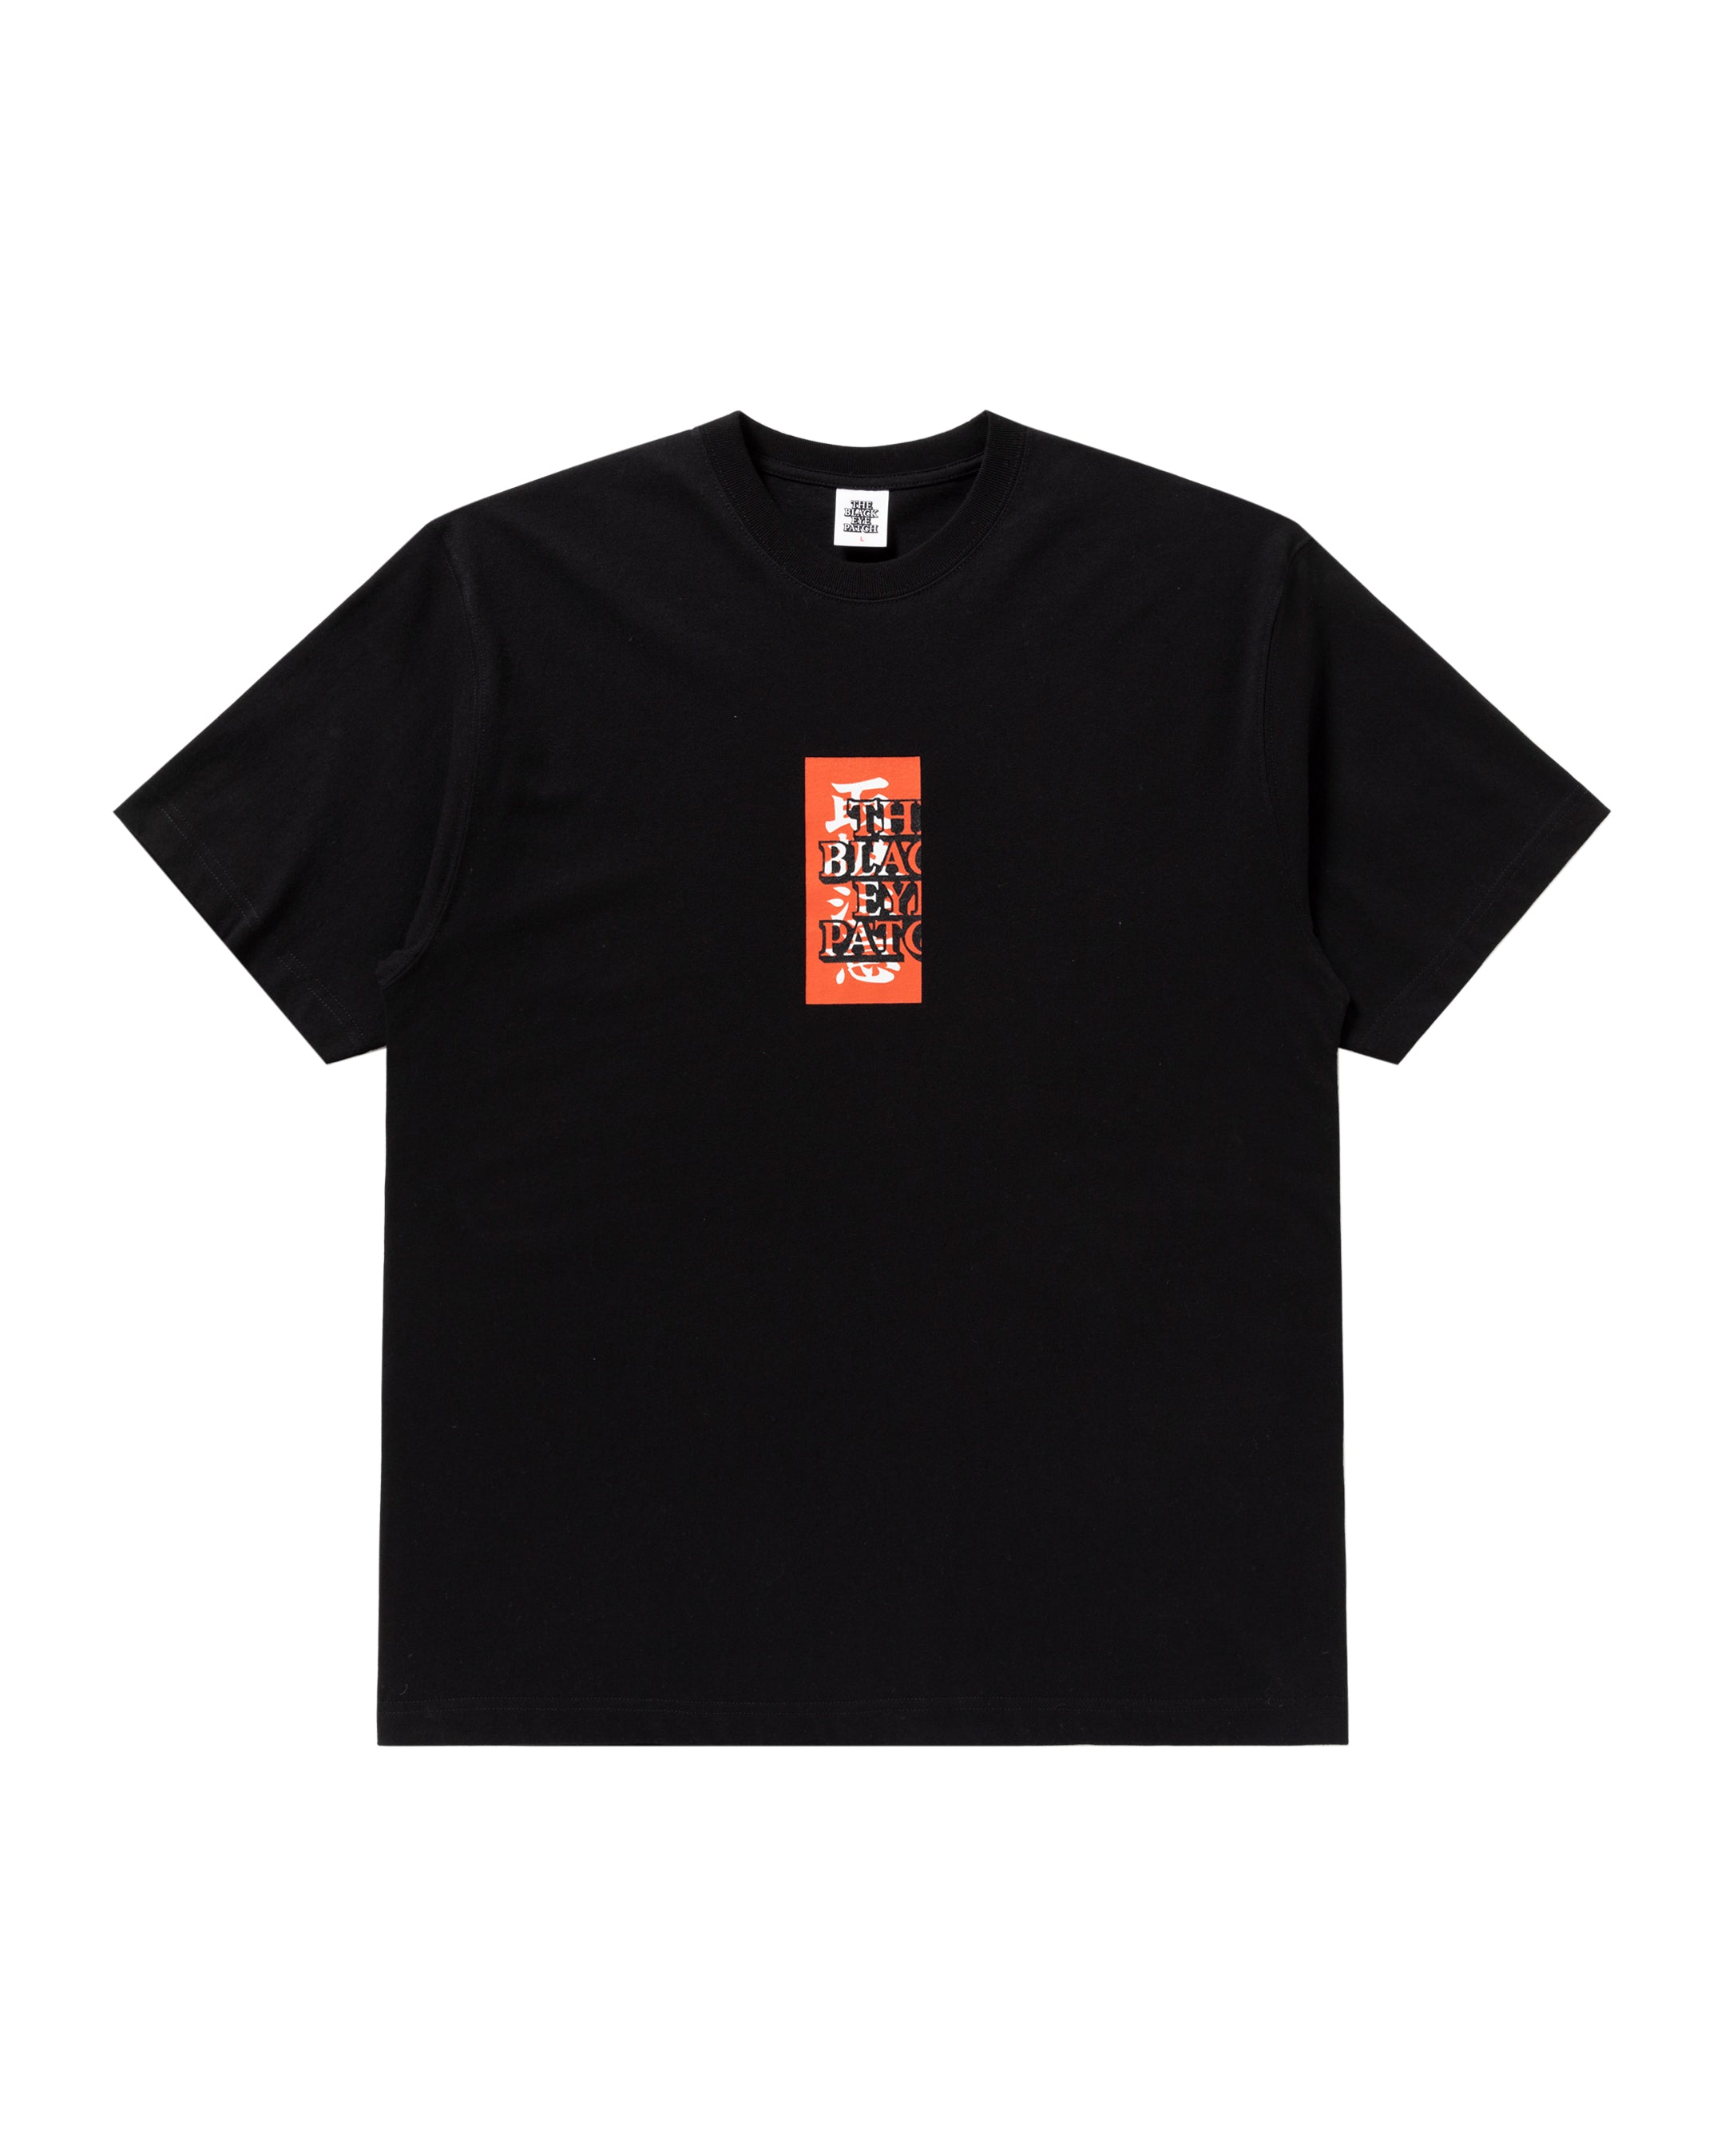 HANDLE WITH CARE TEE BLACK M